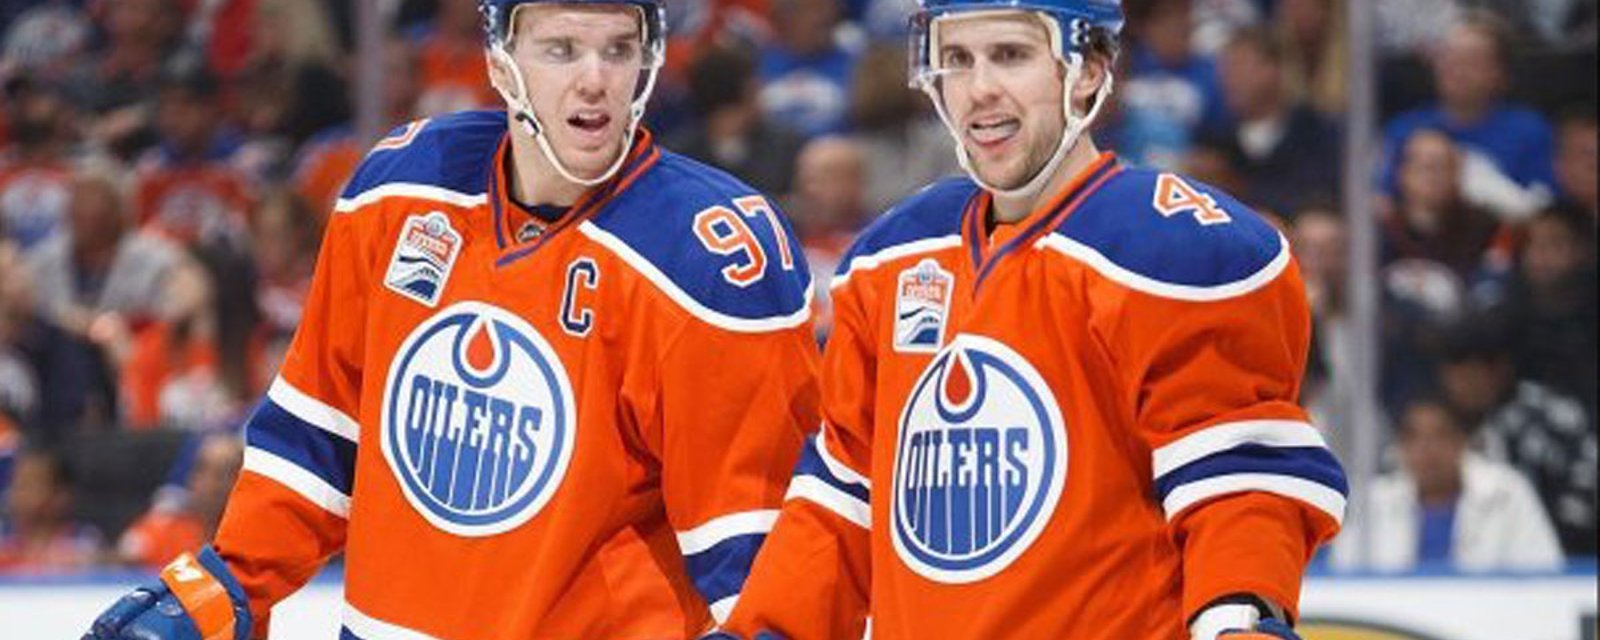 Oilers' teammates come to Russell's defense 